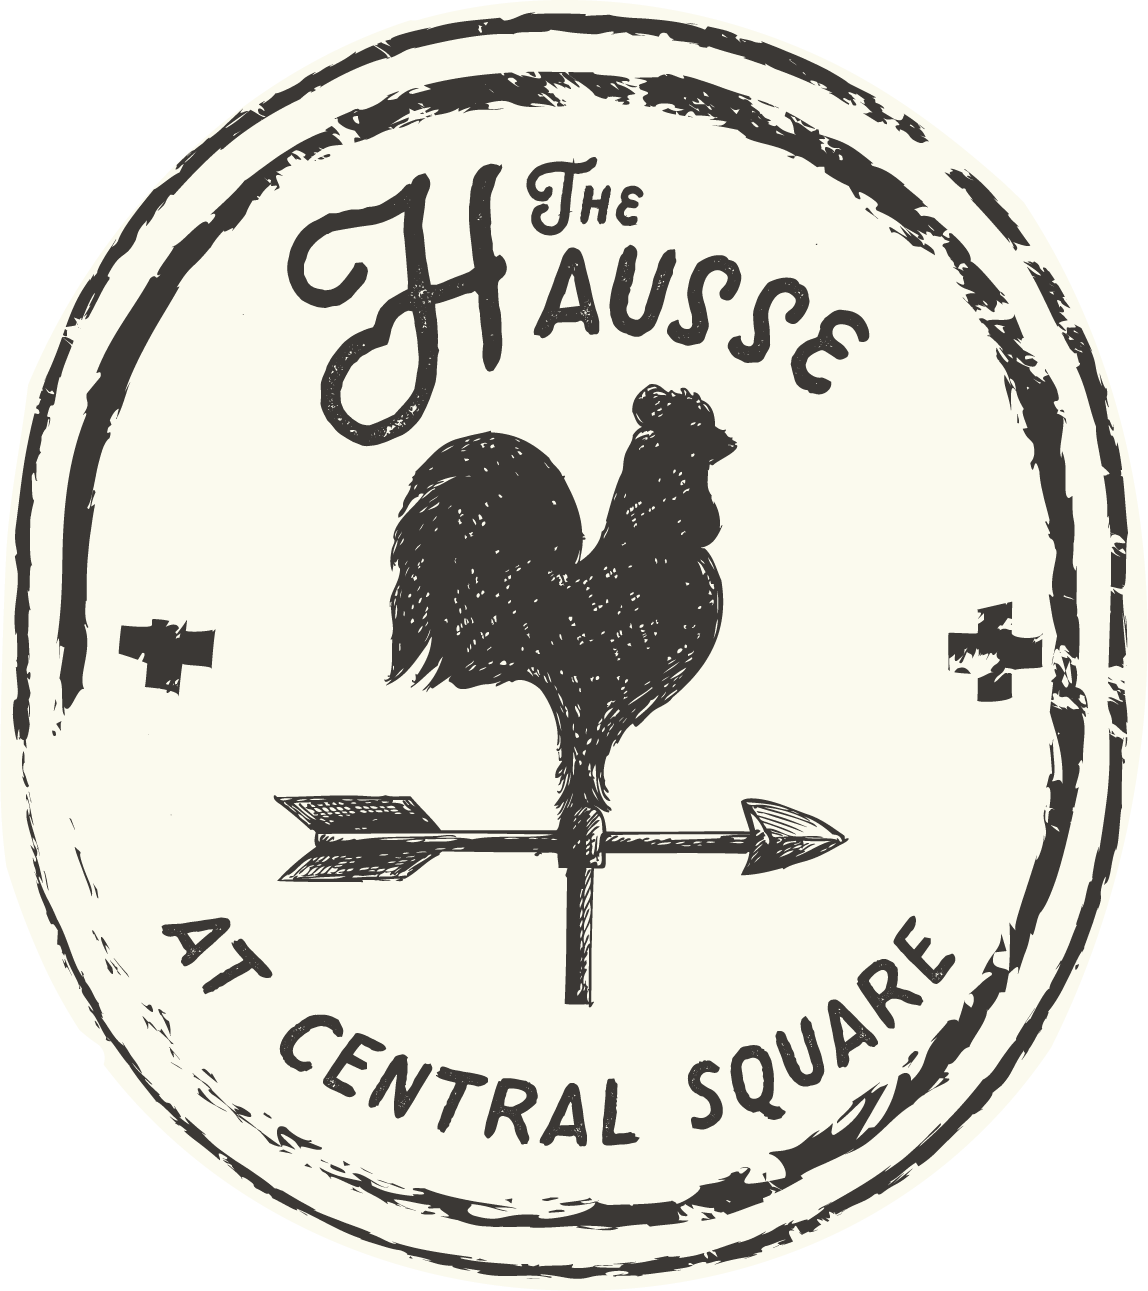 The Hausse at Central Square